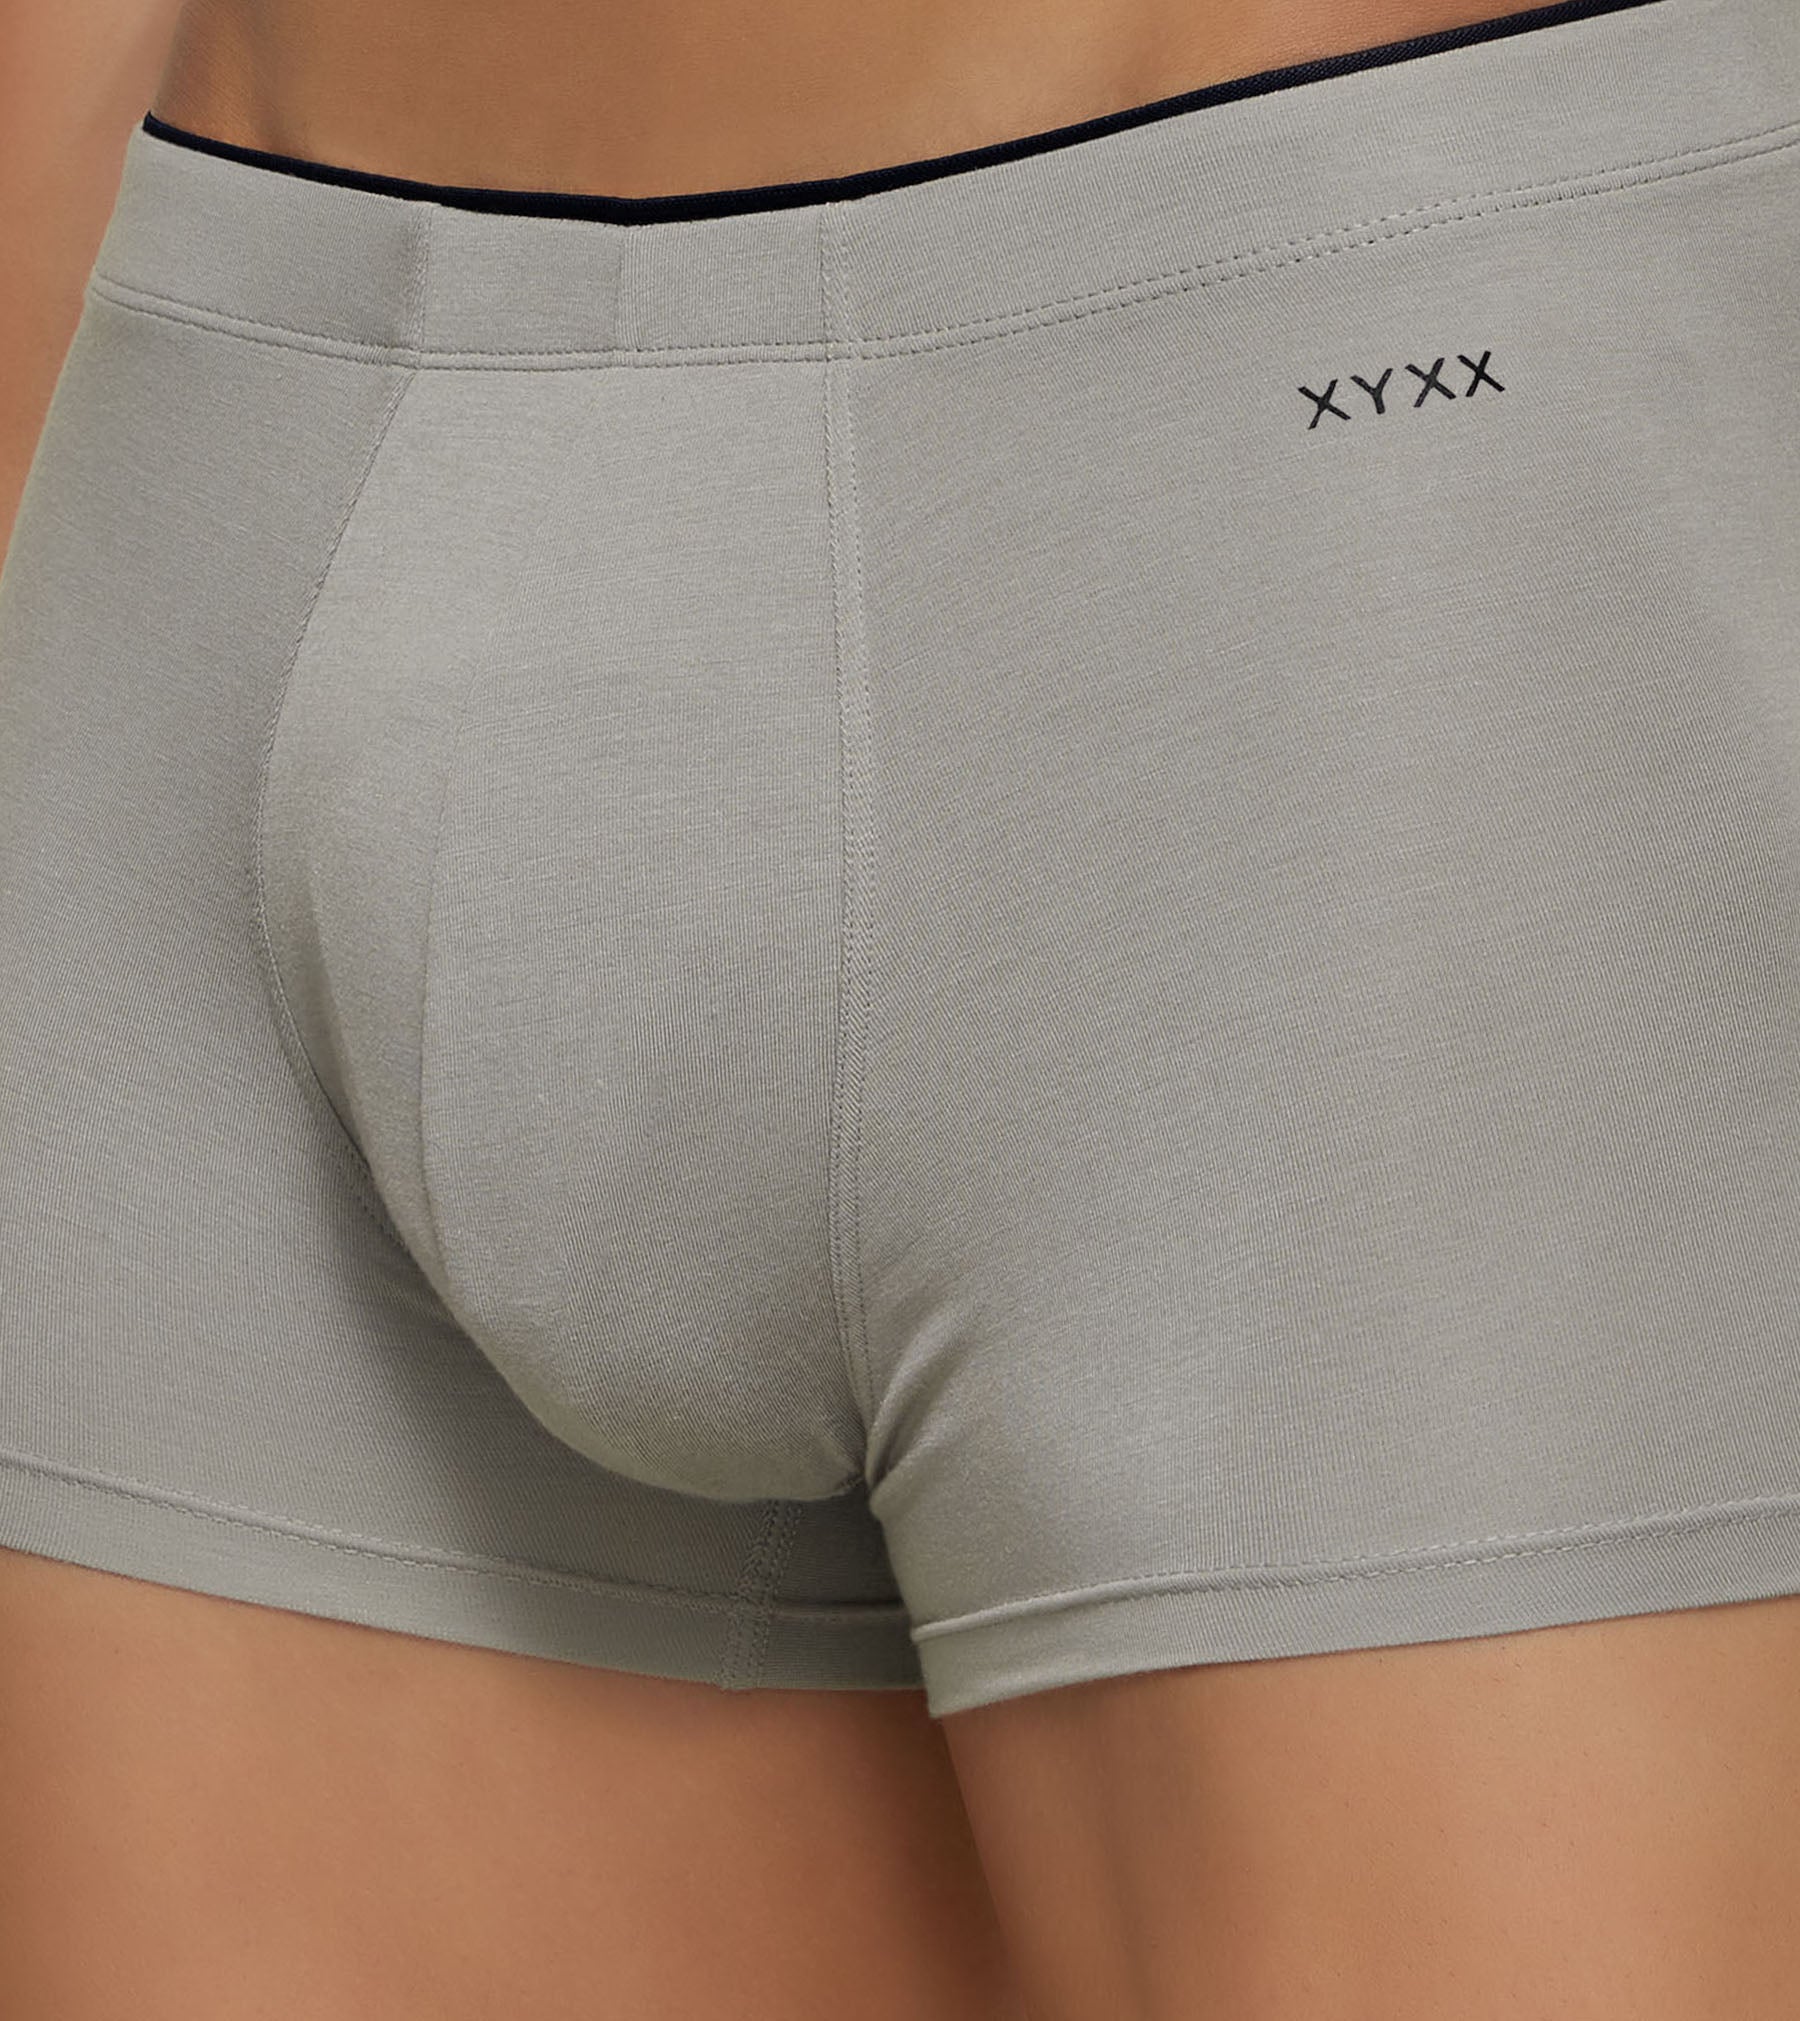 Uno Modal Trunks For Men Pack of 3 (Light Grey, Grey) -  XYXX Mens Apparels